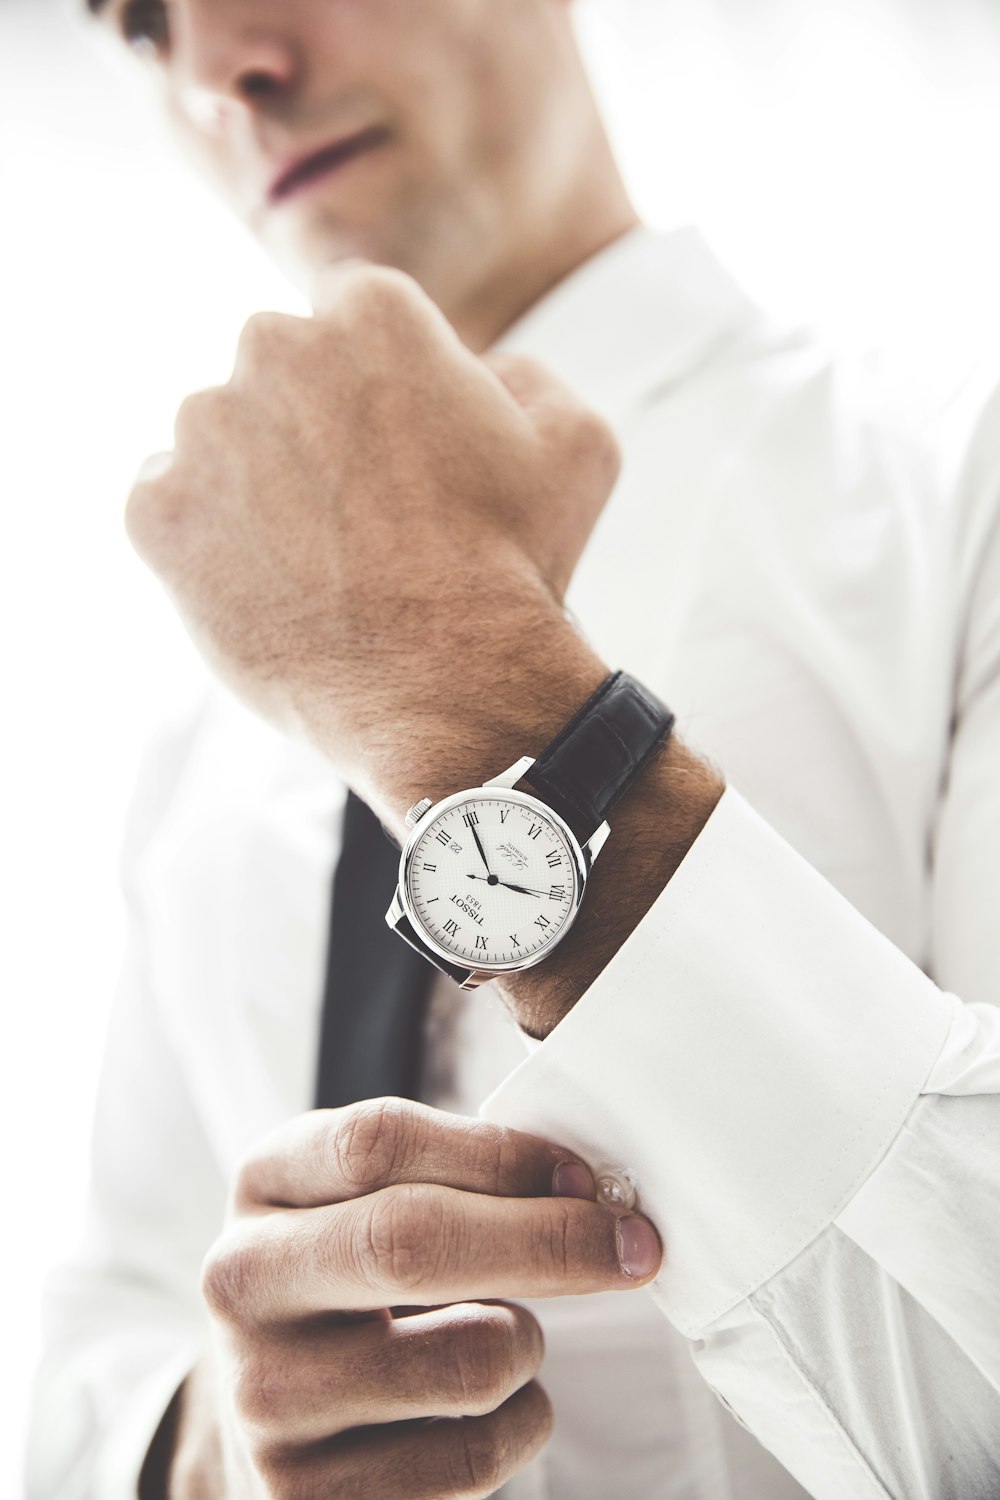 person wearing round silver-colored analog watch with black leather band